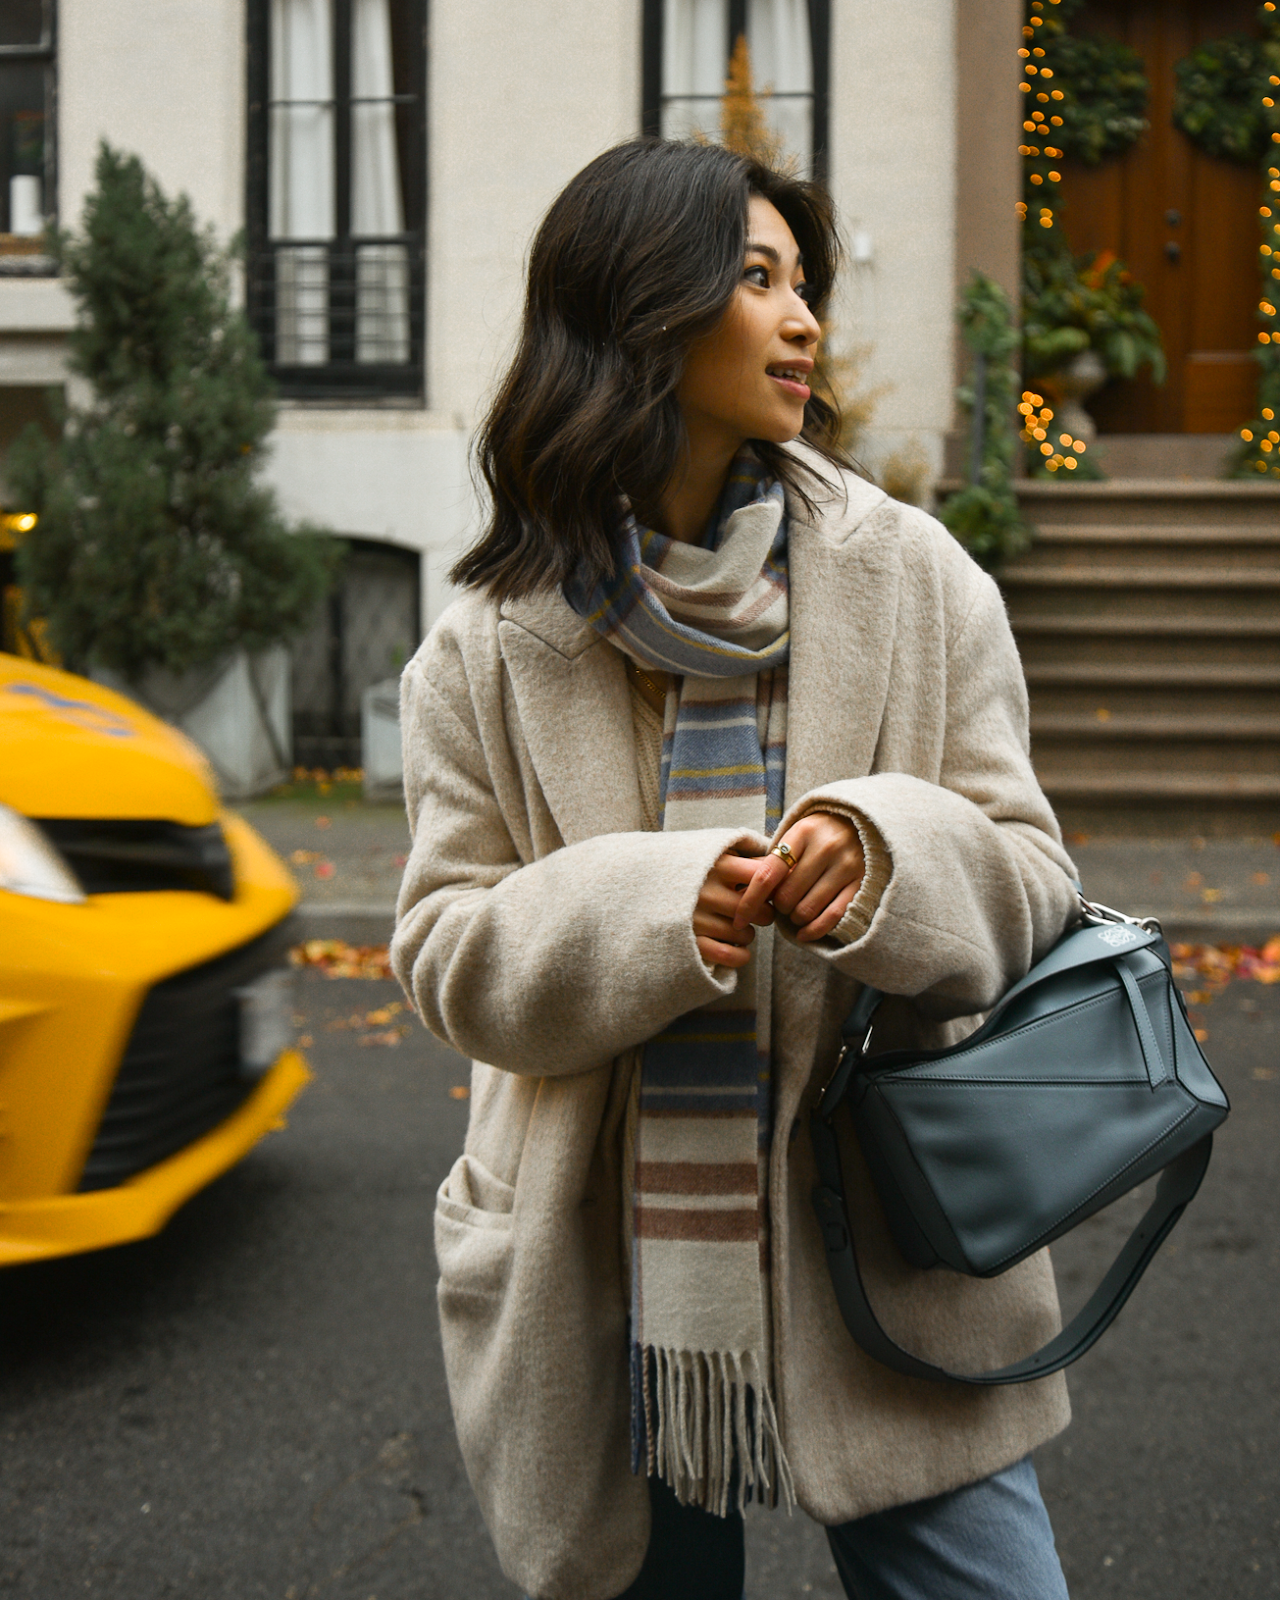 Oversized brushed wool blazer, Topshop blazer coat in New York, casual style in the city, blue Loewe puzzle bag outfit / Van Le - FOREVERVANNY.com